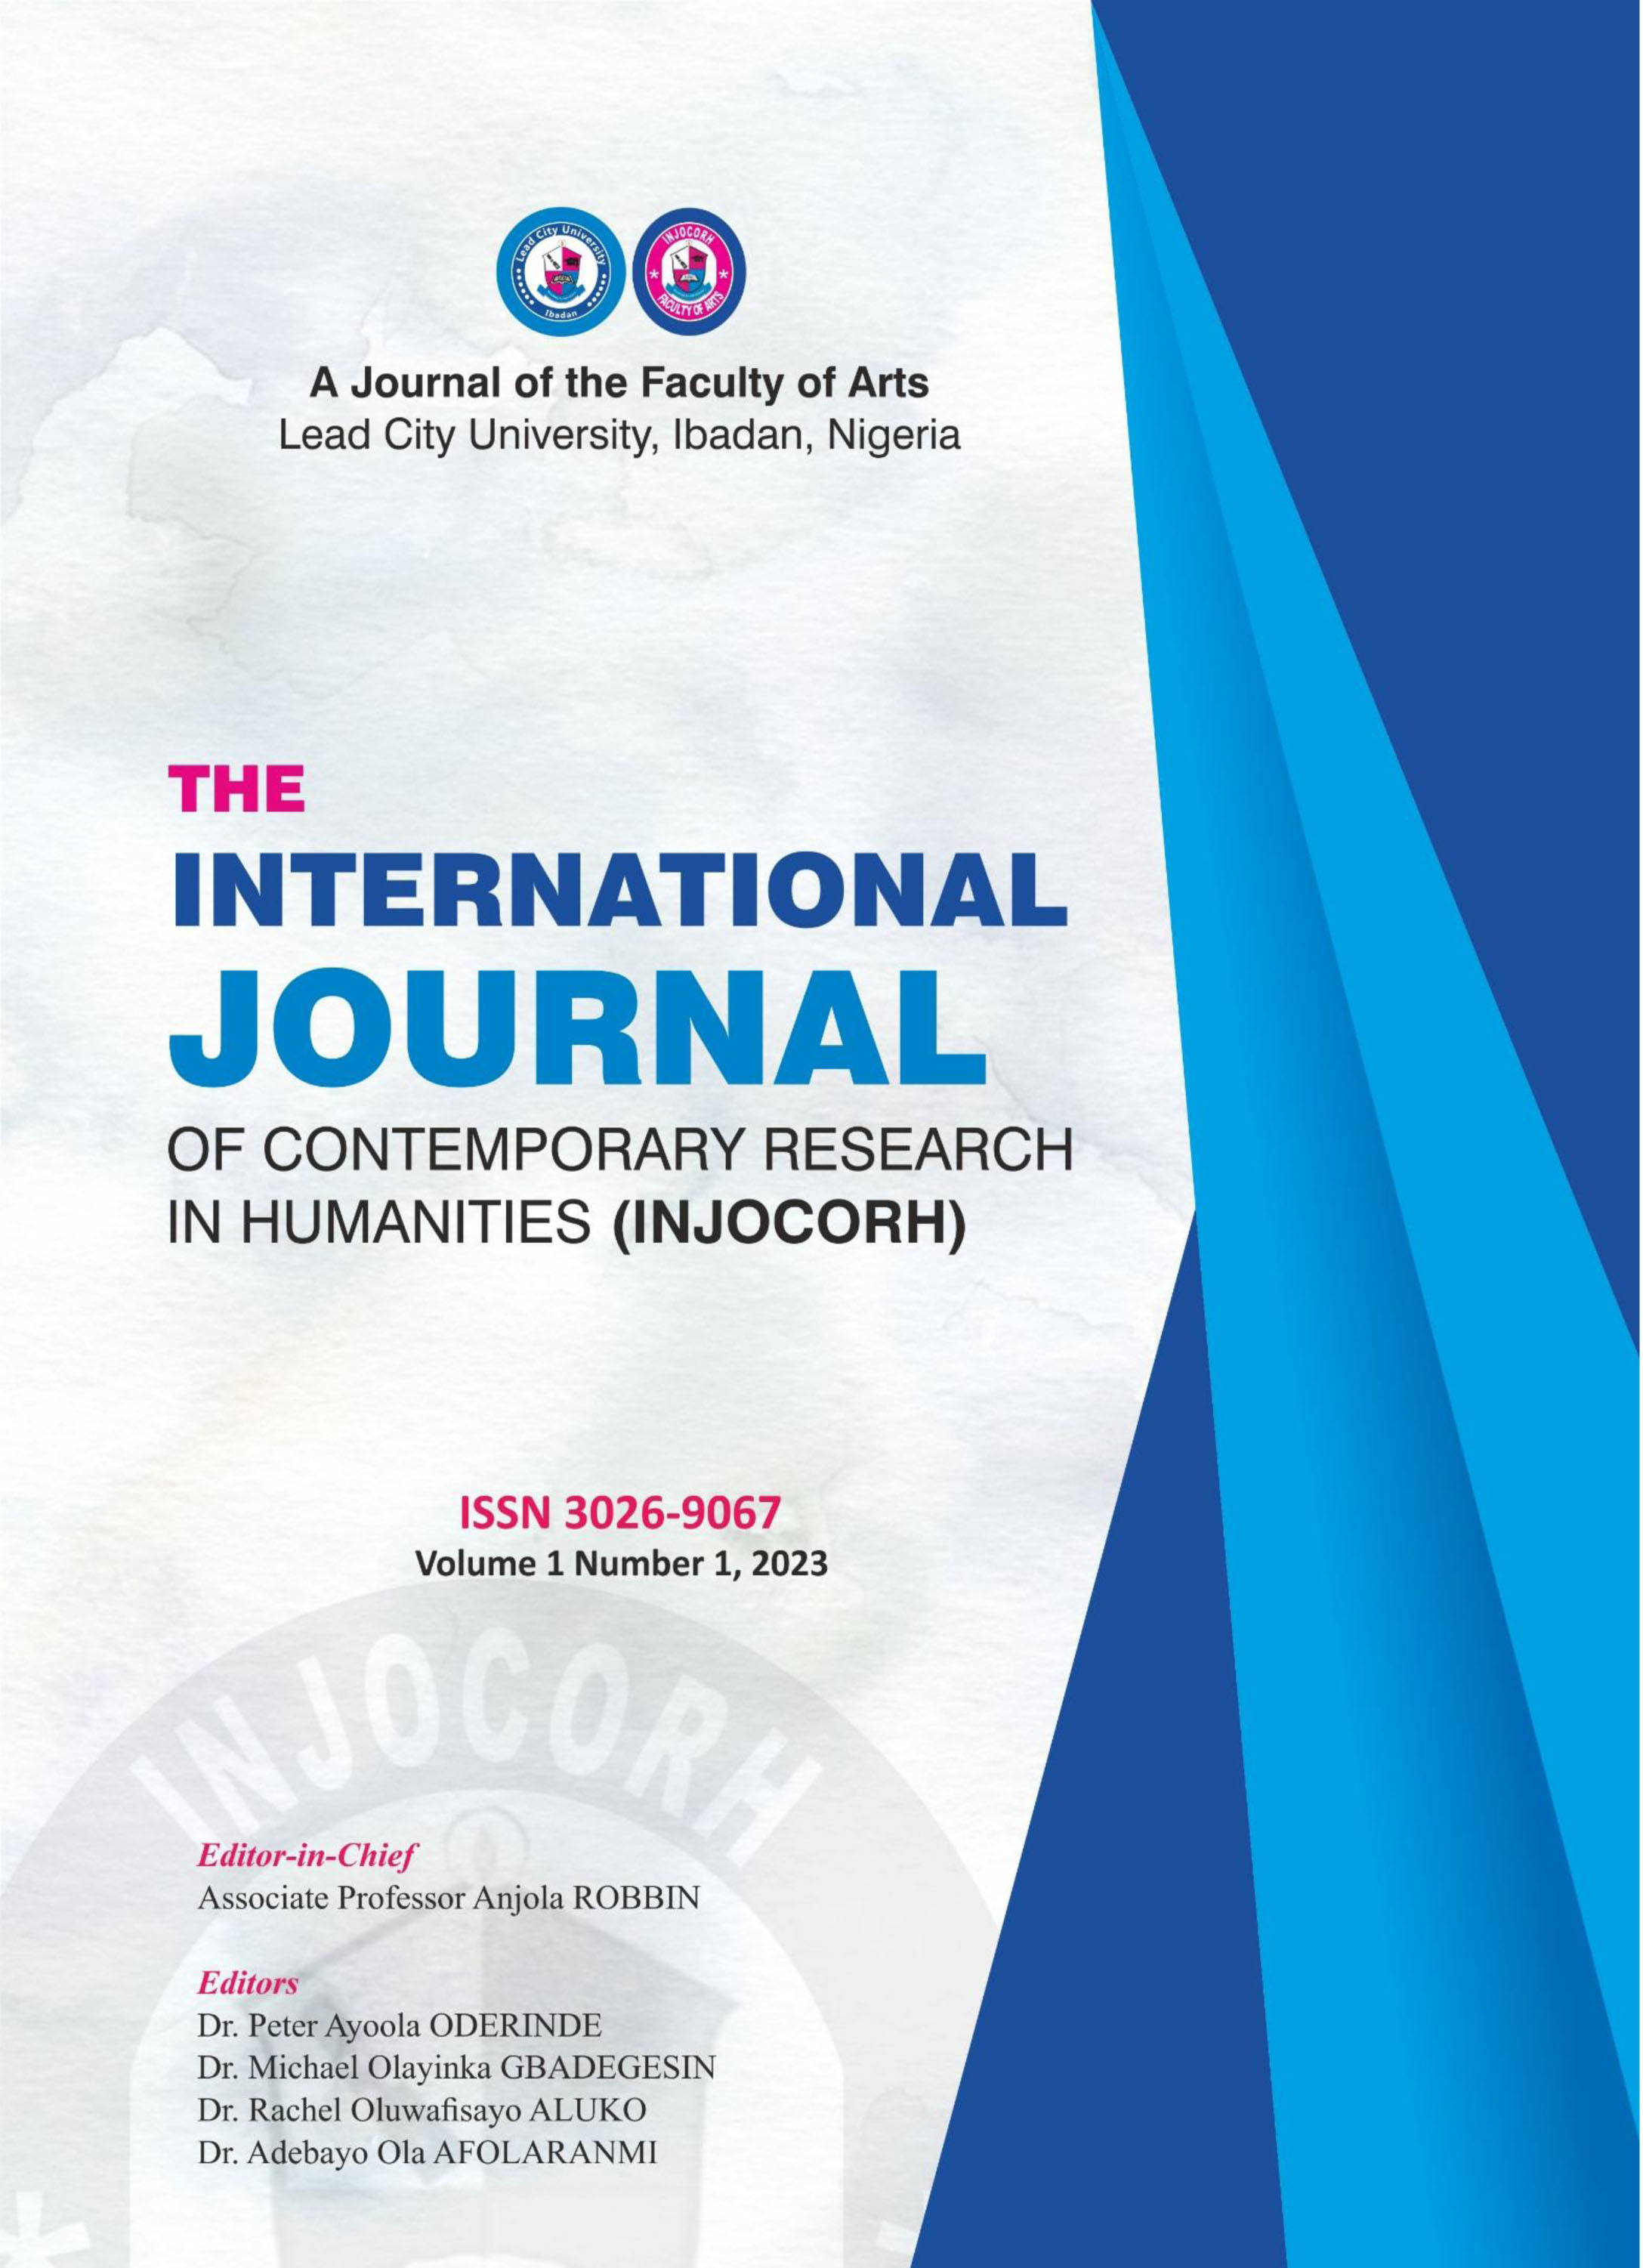 					View Vol. 1 No. 1 (2023): The International Journal of Contemporary Research in Humanities
				